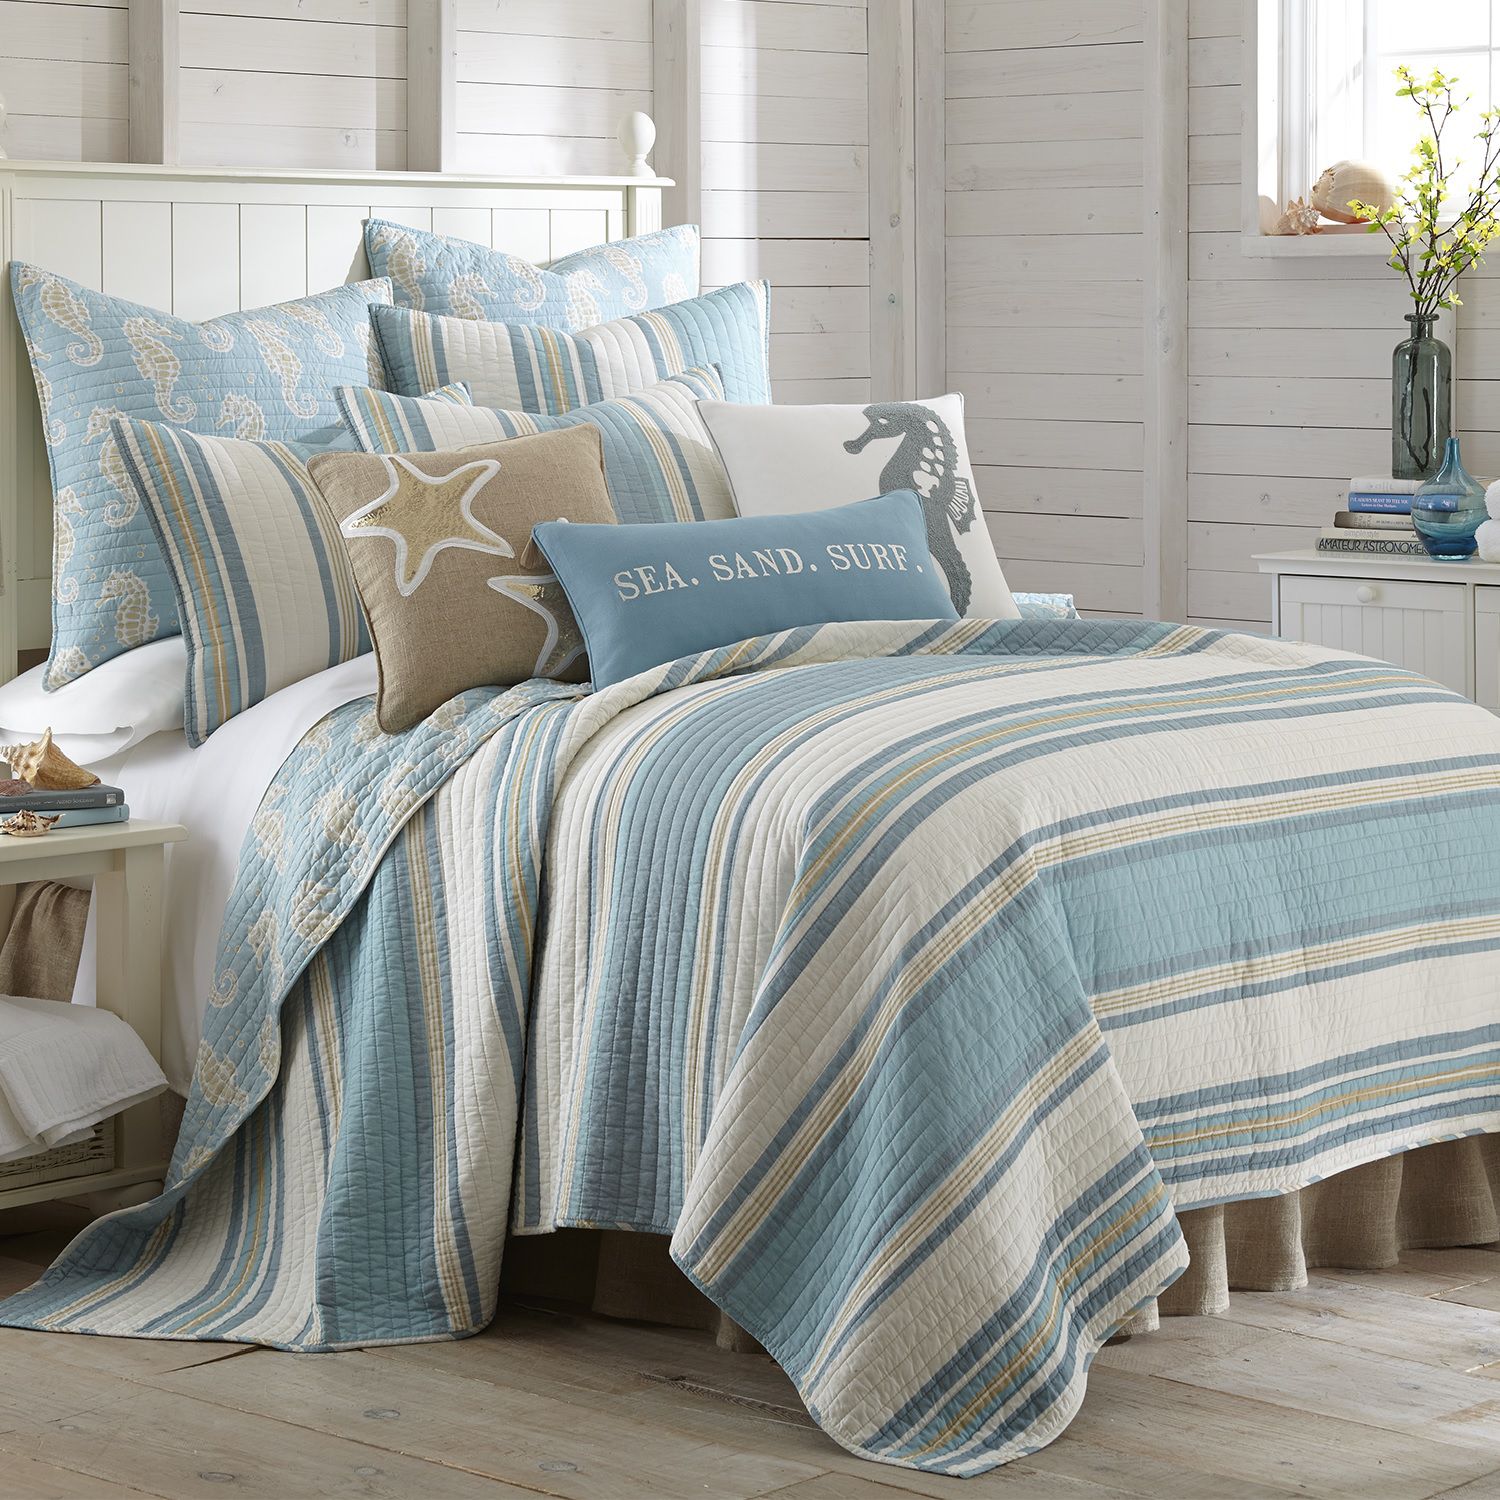 Image for Levtex Home Maui Quilt Collection at Kohl's.